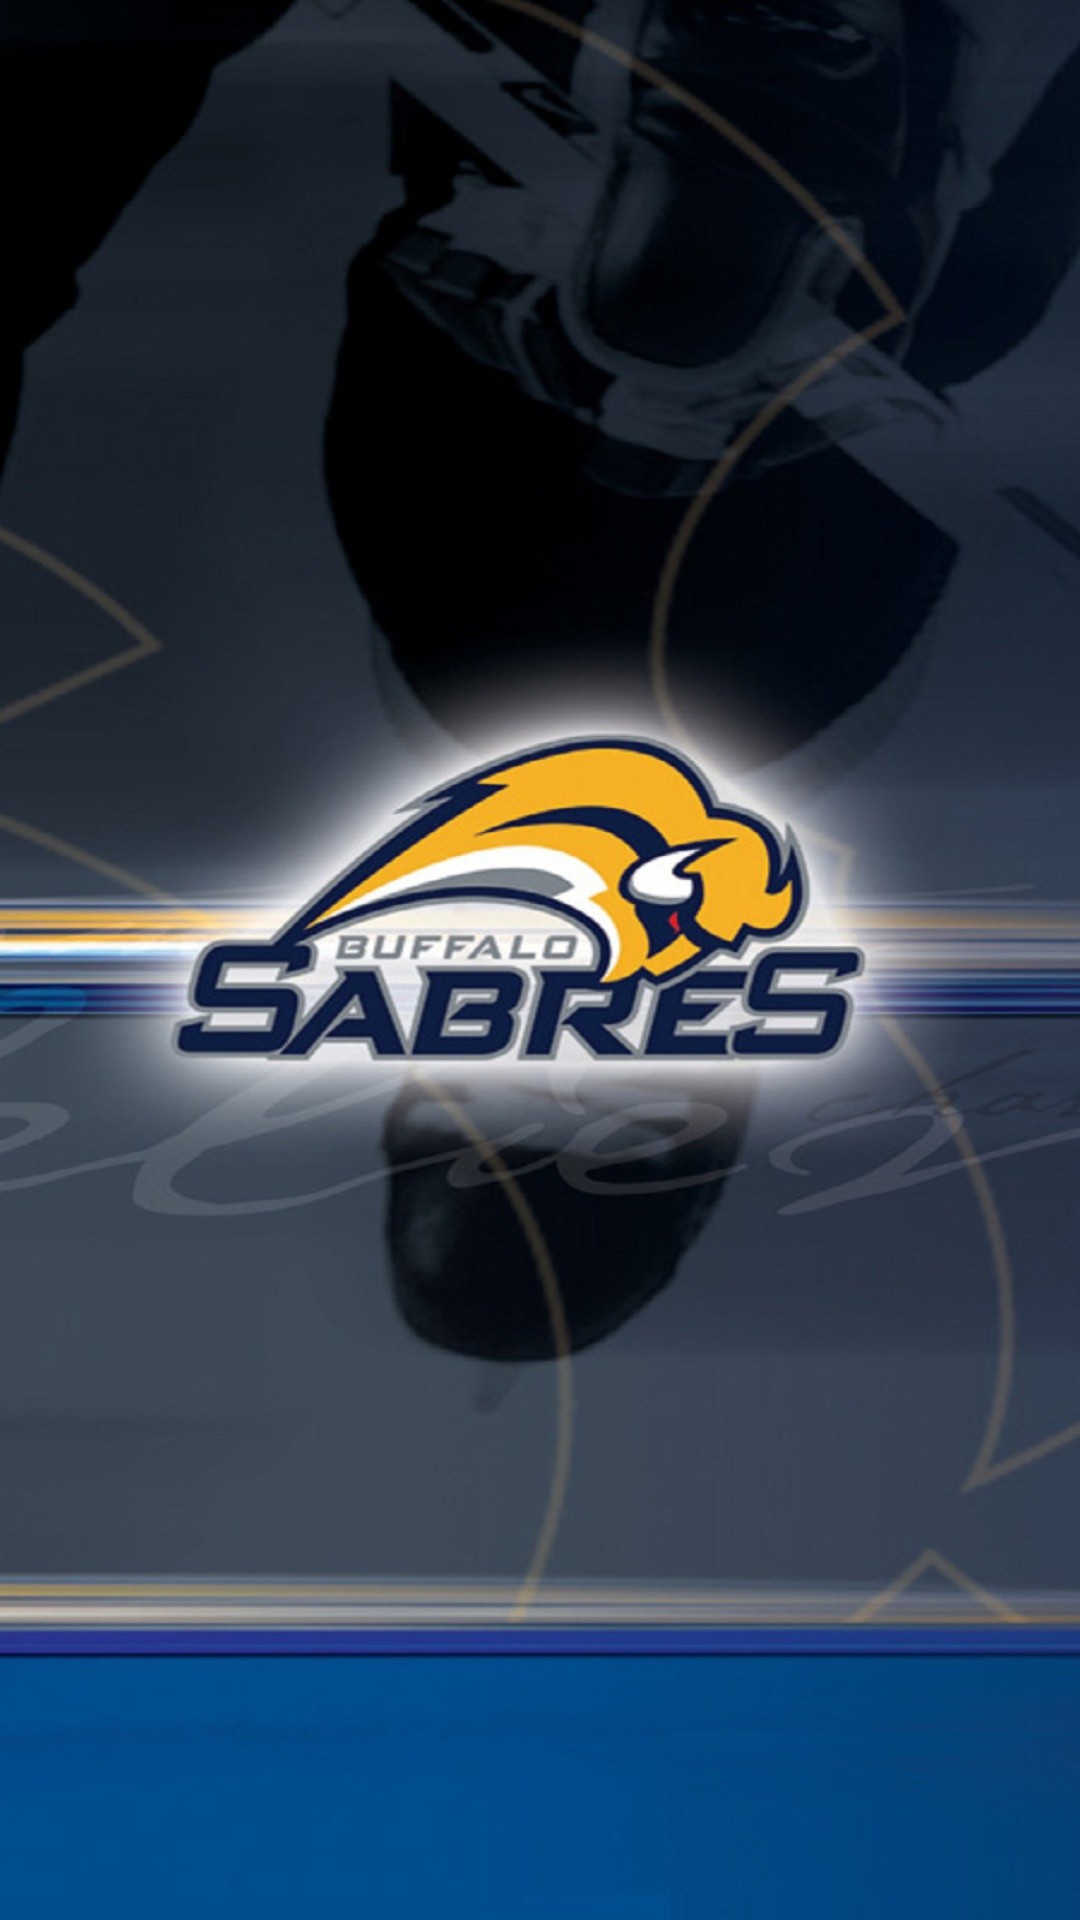 1080x1920 Buffalo Sabres Wallpaper for iPhone 7 Plus